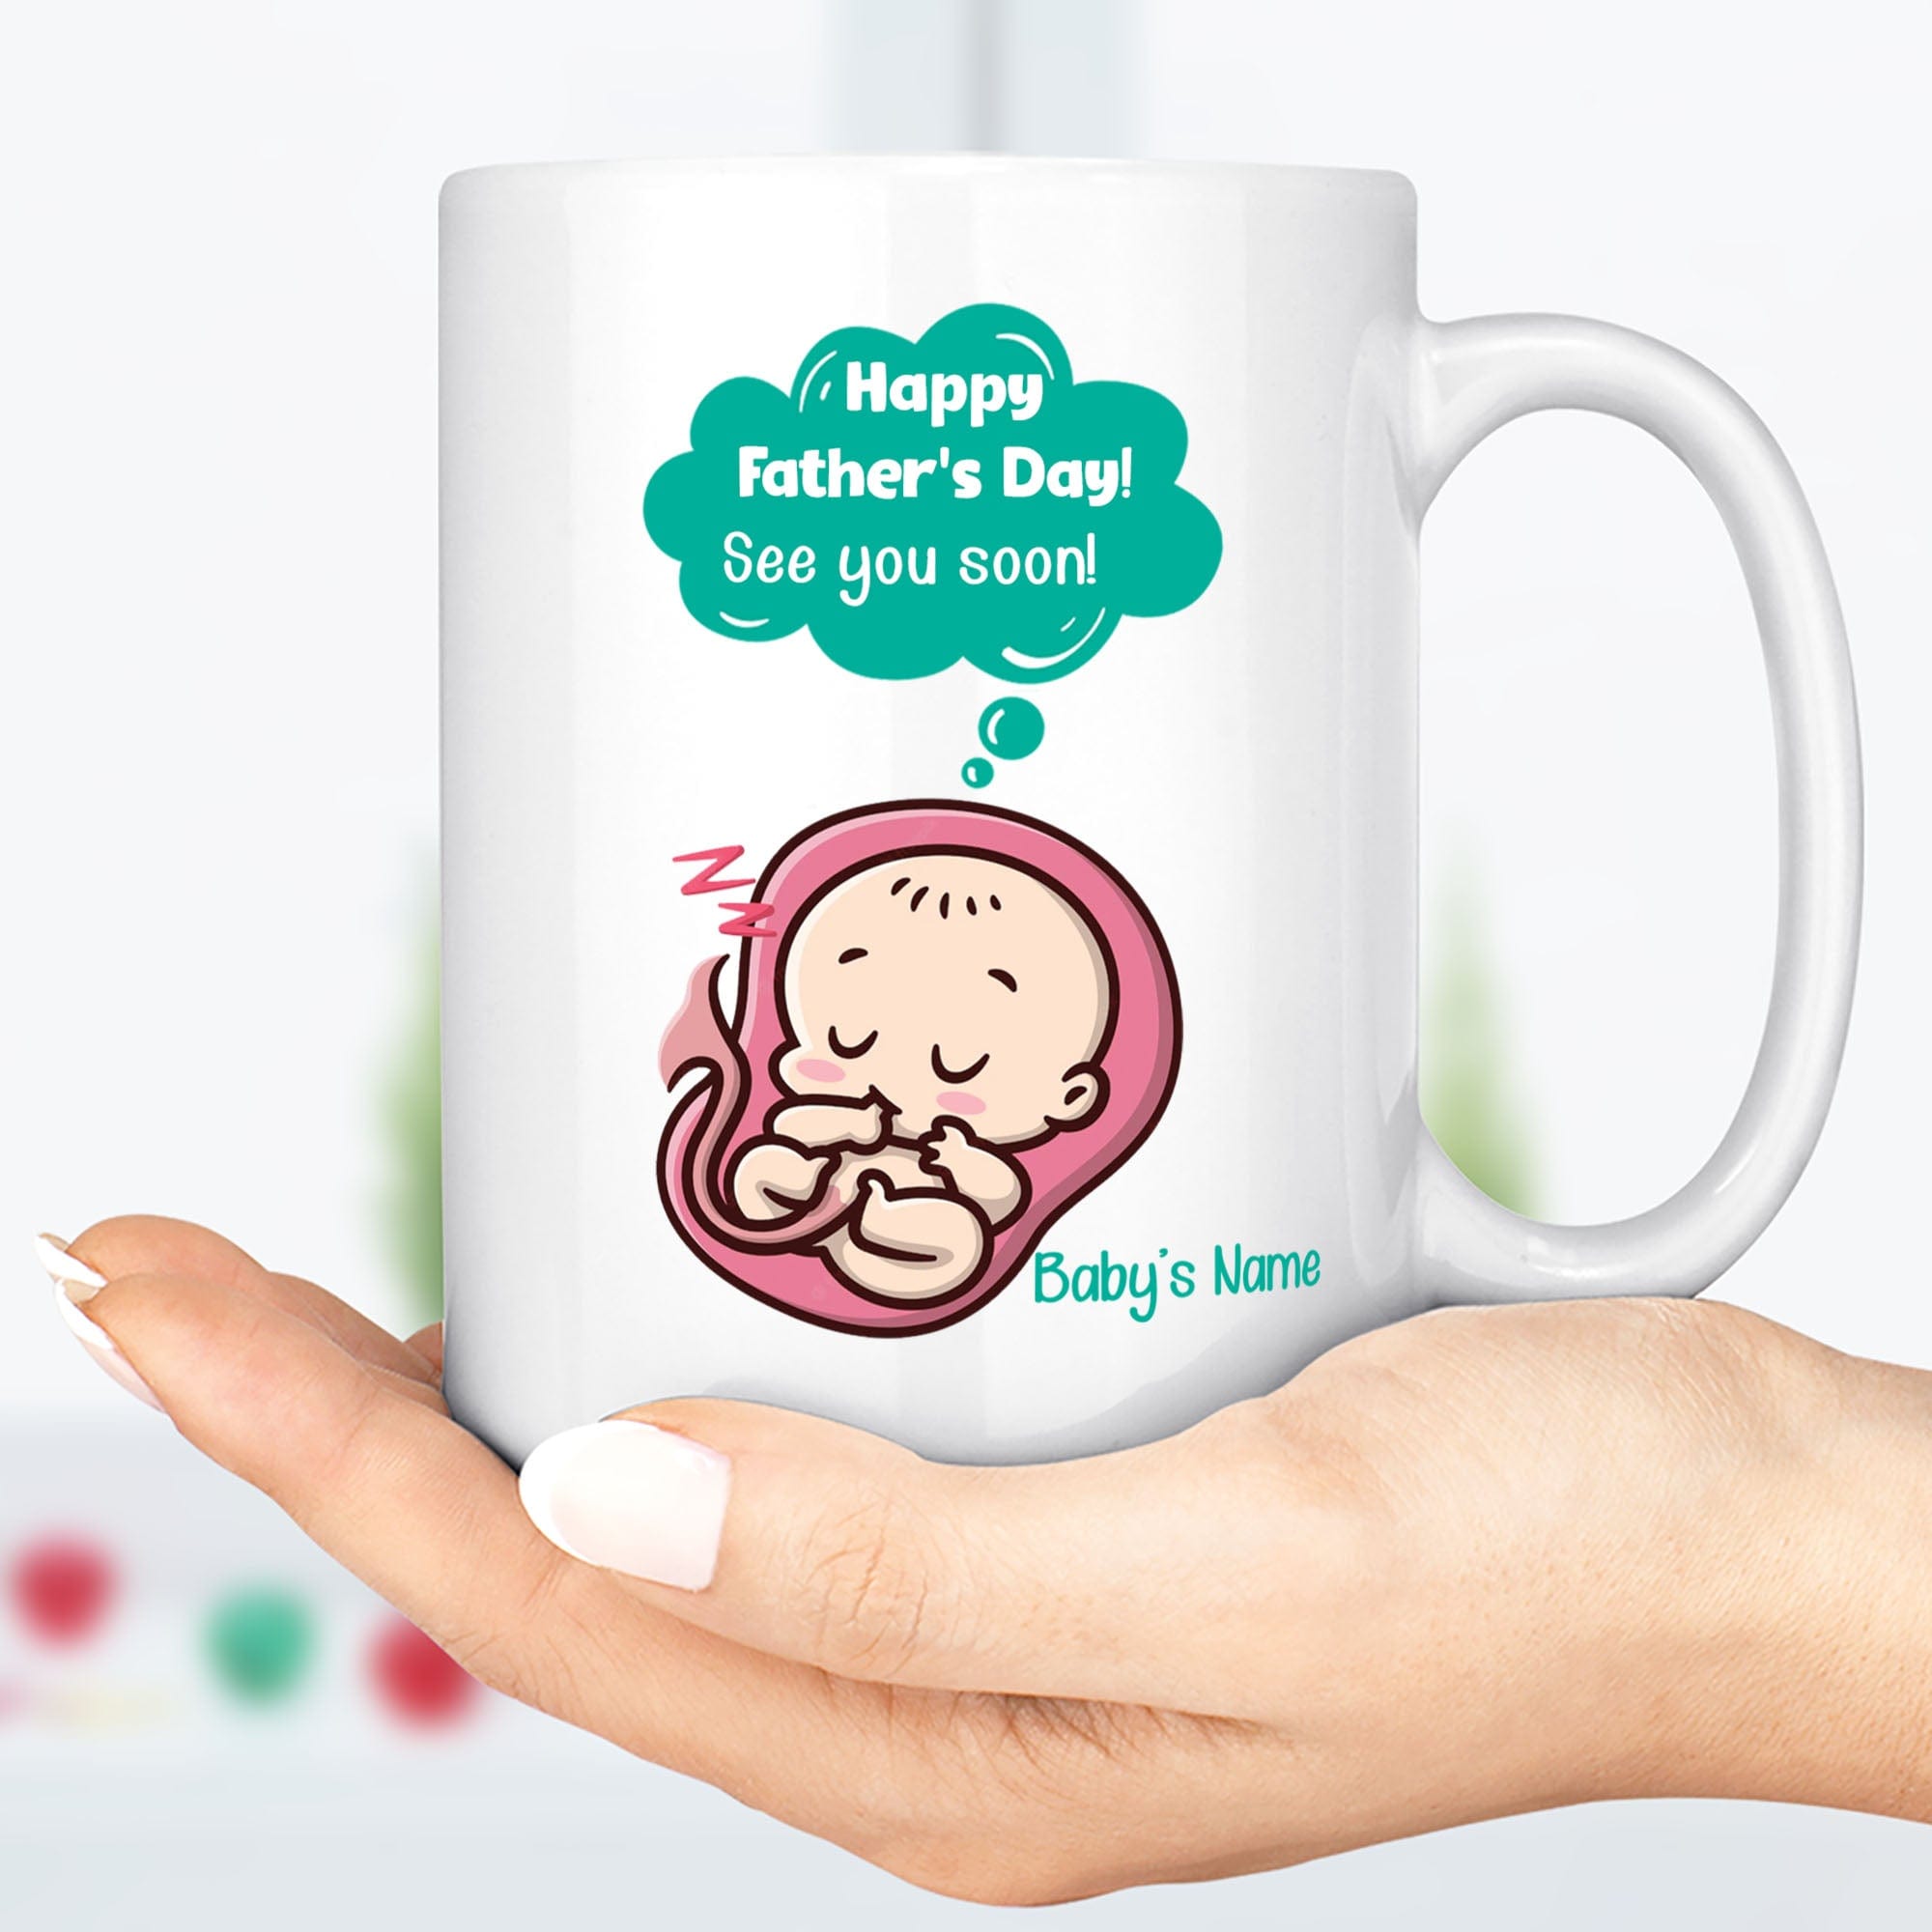 GeckoCustom Soon To Be Mug, Father's Day Mug, Expectant Father, Daddy To Be, Pregnancy Mug, Unborn Baby, First Time Dad, Baby, Utero, Unique, Funny C302 11oz